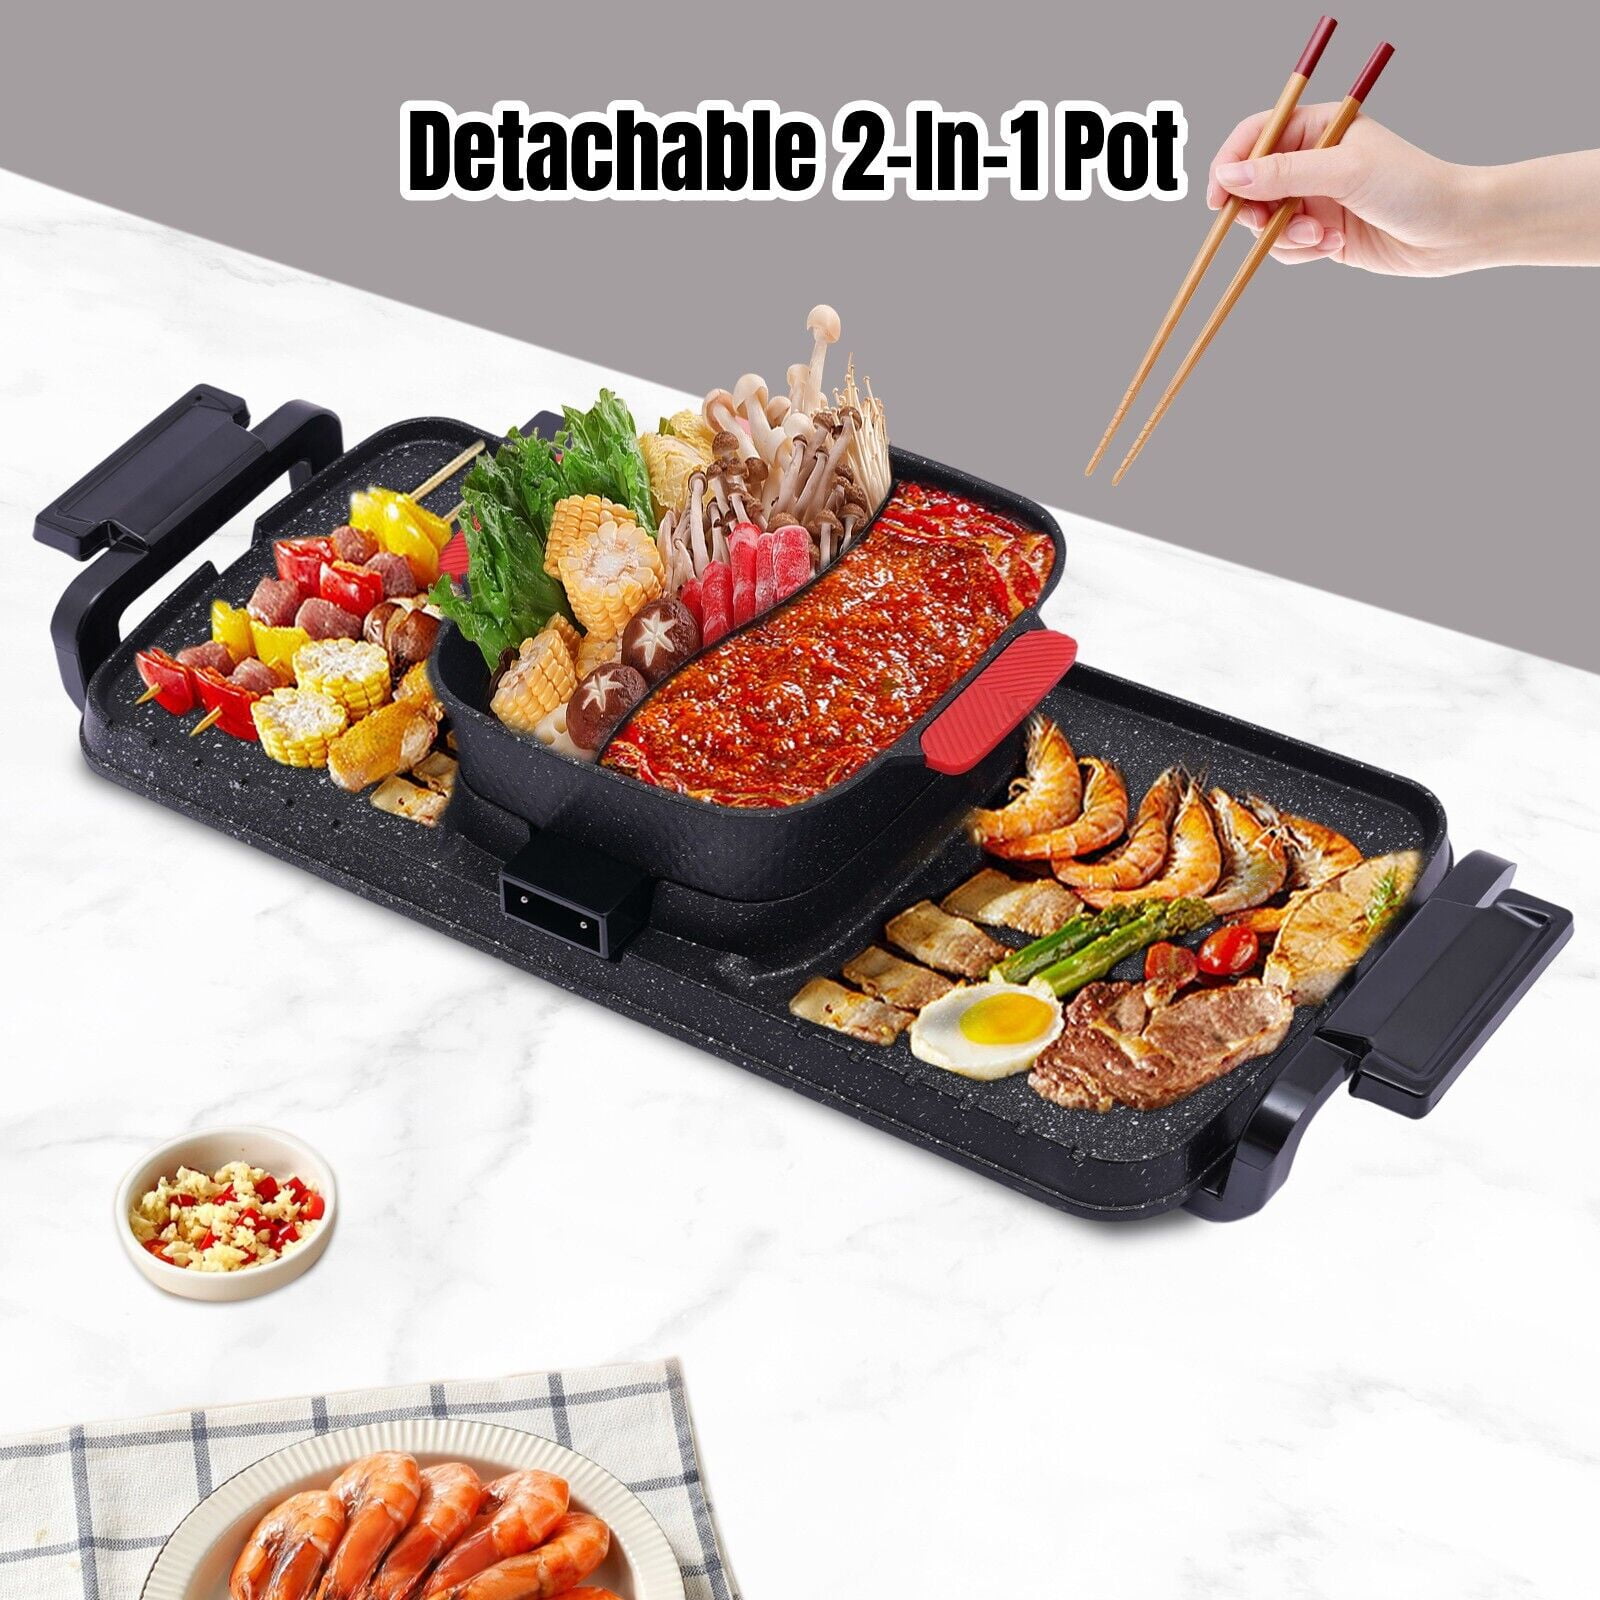 YIYIBYUS Red 2200-Watt 2-in-1 Outdoor Smokeless Grill Pot Cooking Accessory  Kit Household Electric Grill Plate HG-ZTYJ-5212 - The Home Depot